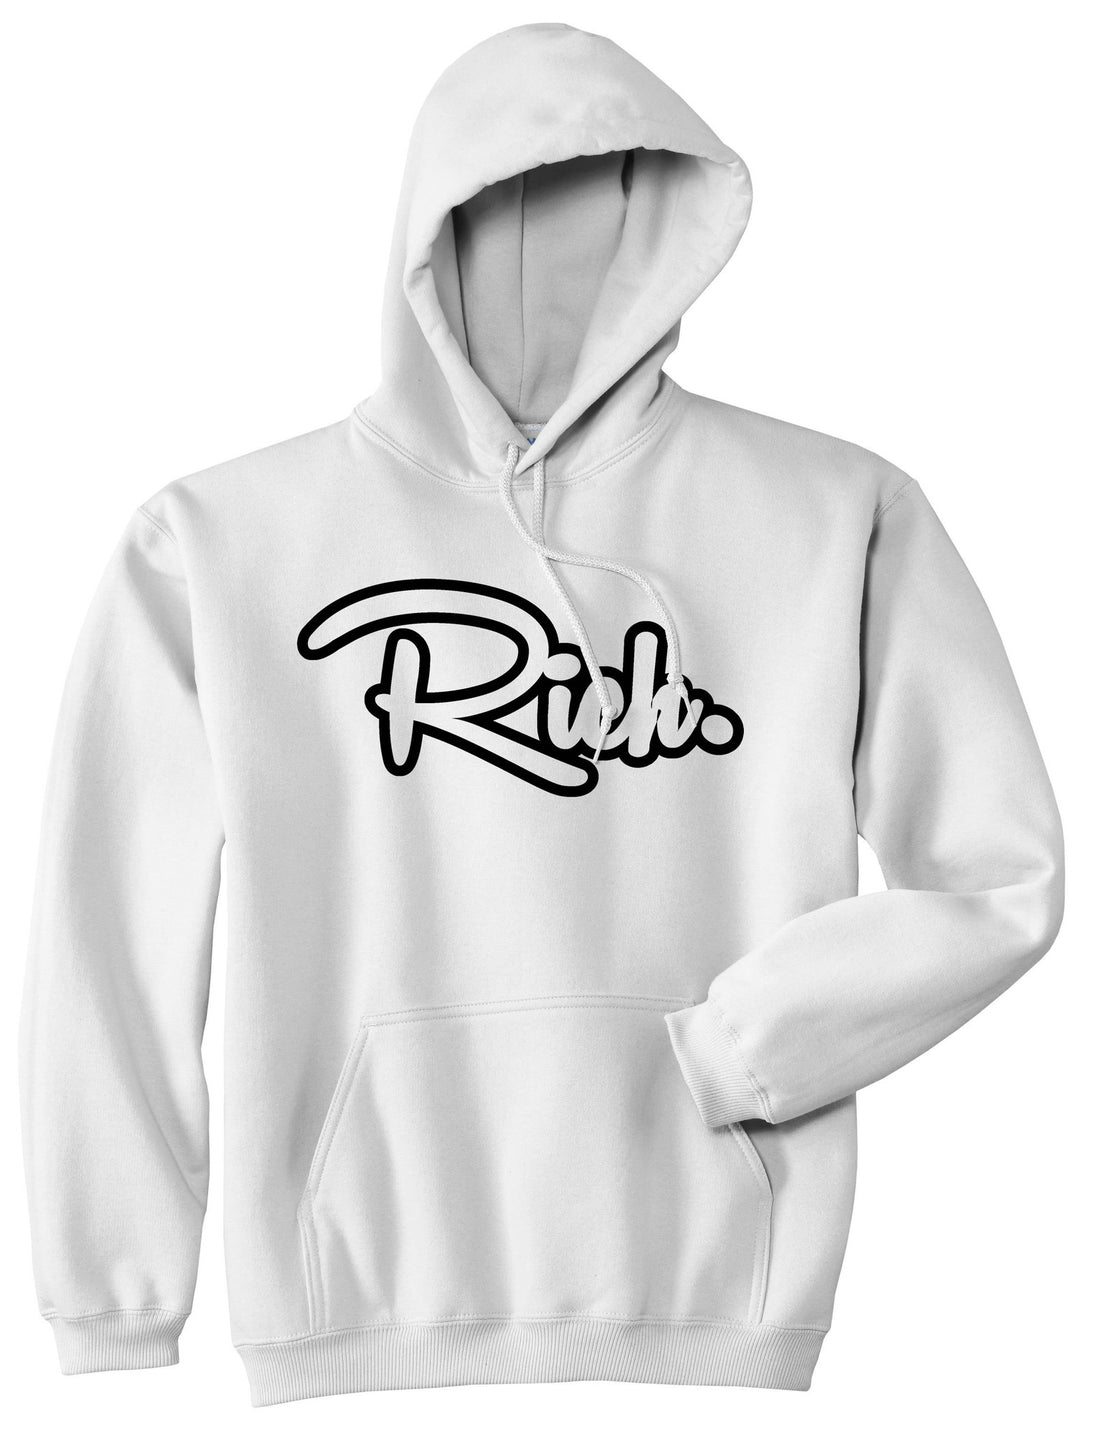 Rich Money Fab Style New York Richie NYC Pullover Hoodie Hoody in White by Kings Of NY